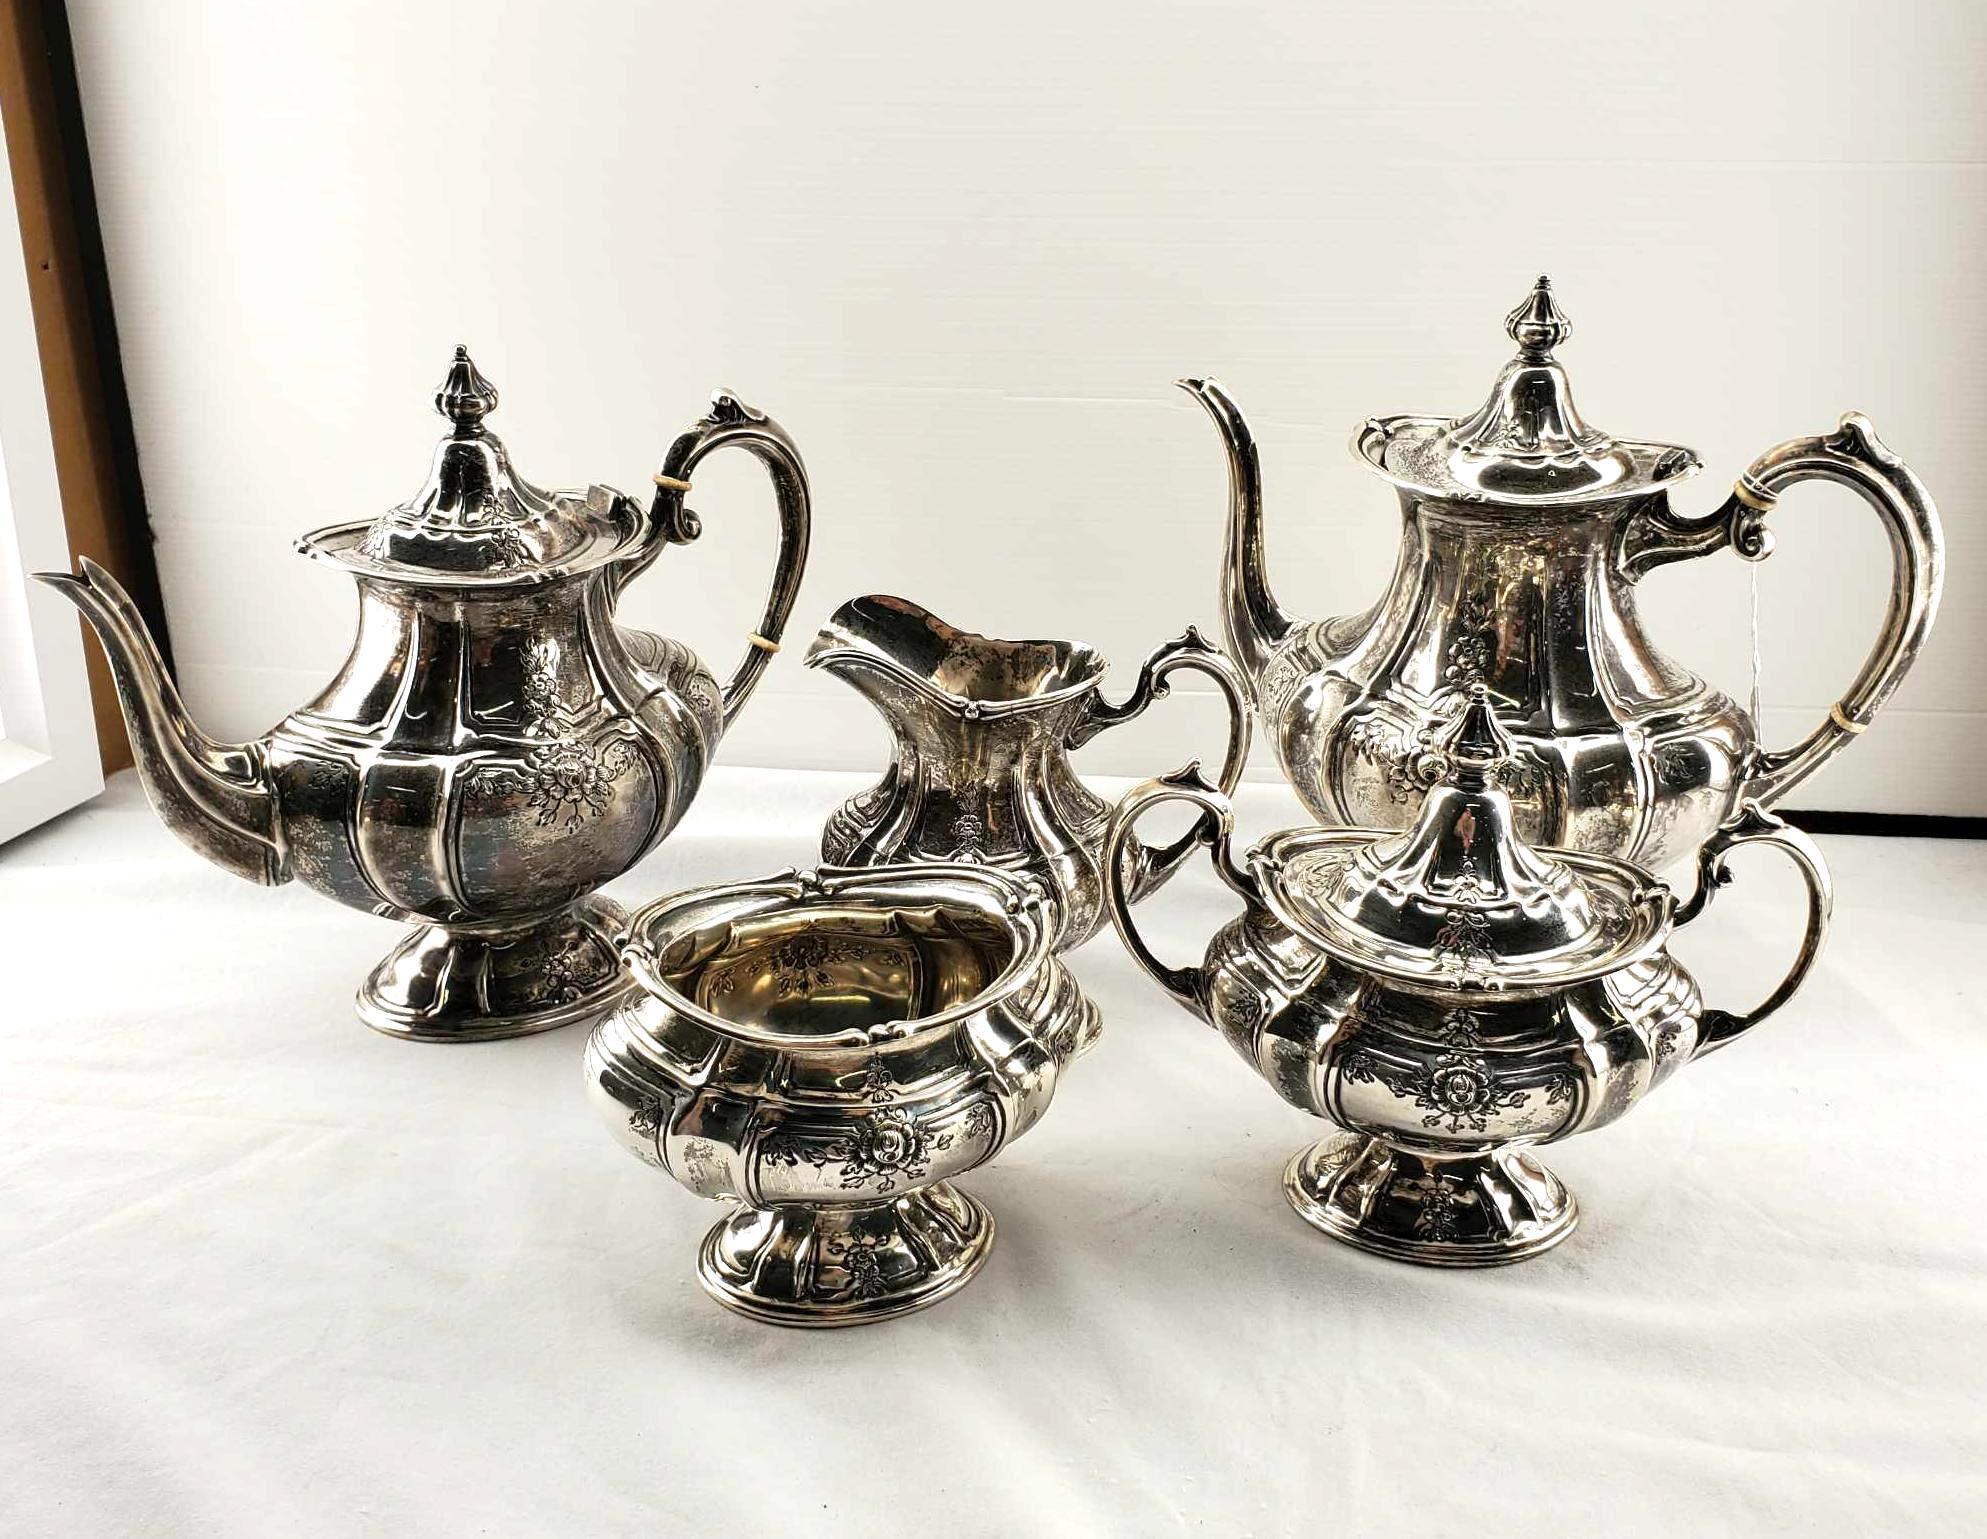 5 Pc. Fisher Sterling Silver "Duncan" Form With Chased Floral Sprays Tea Set On Silver Plated Tray